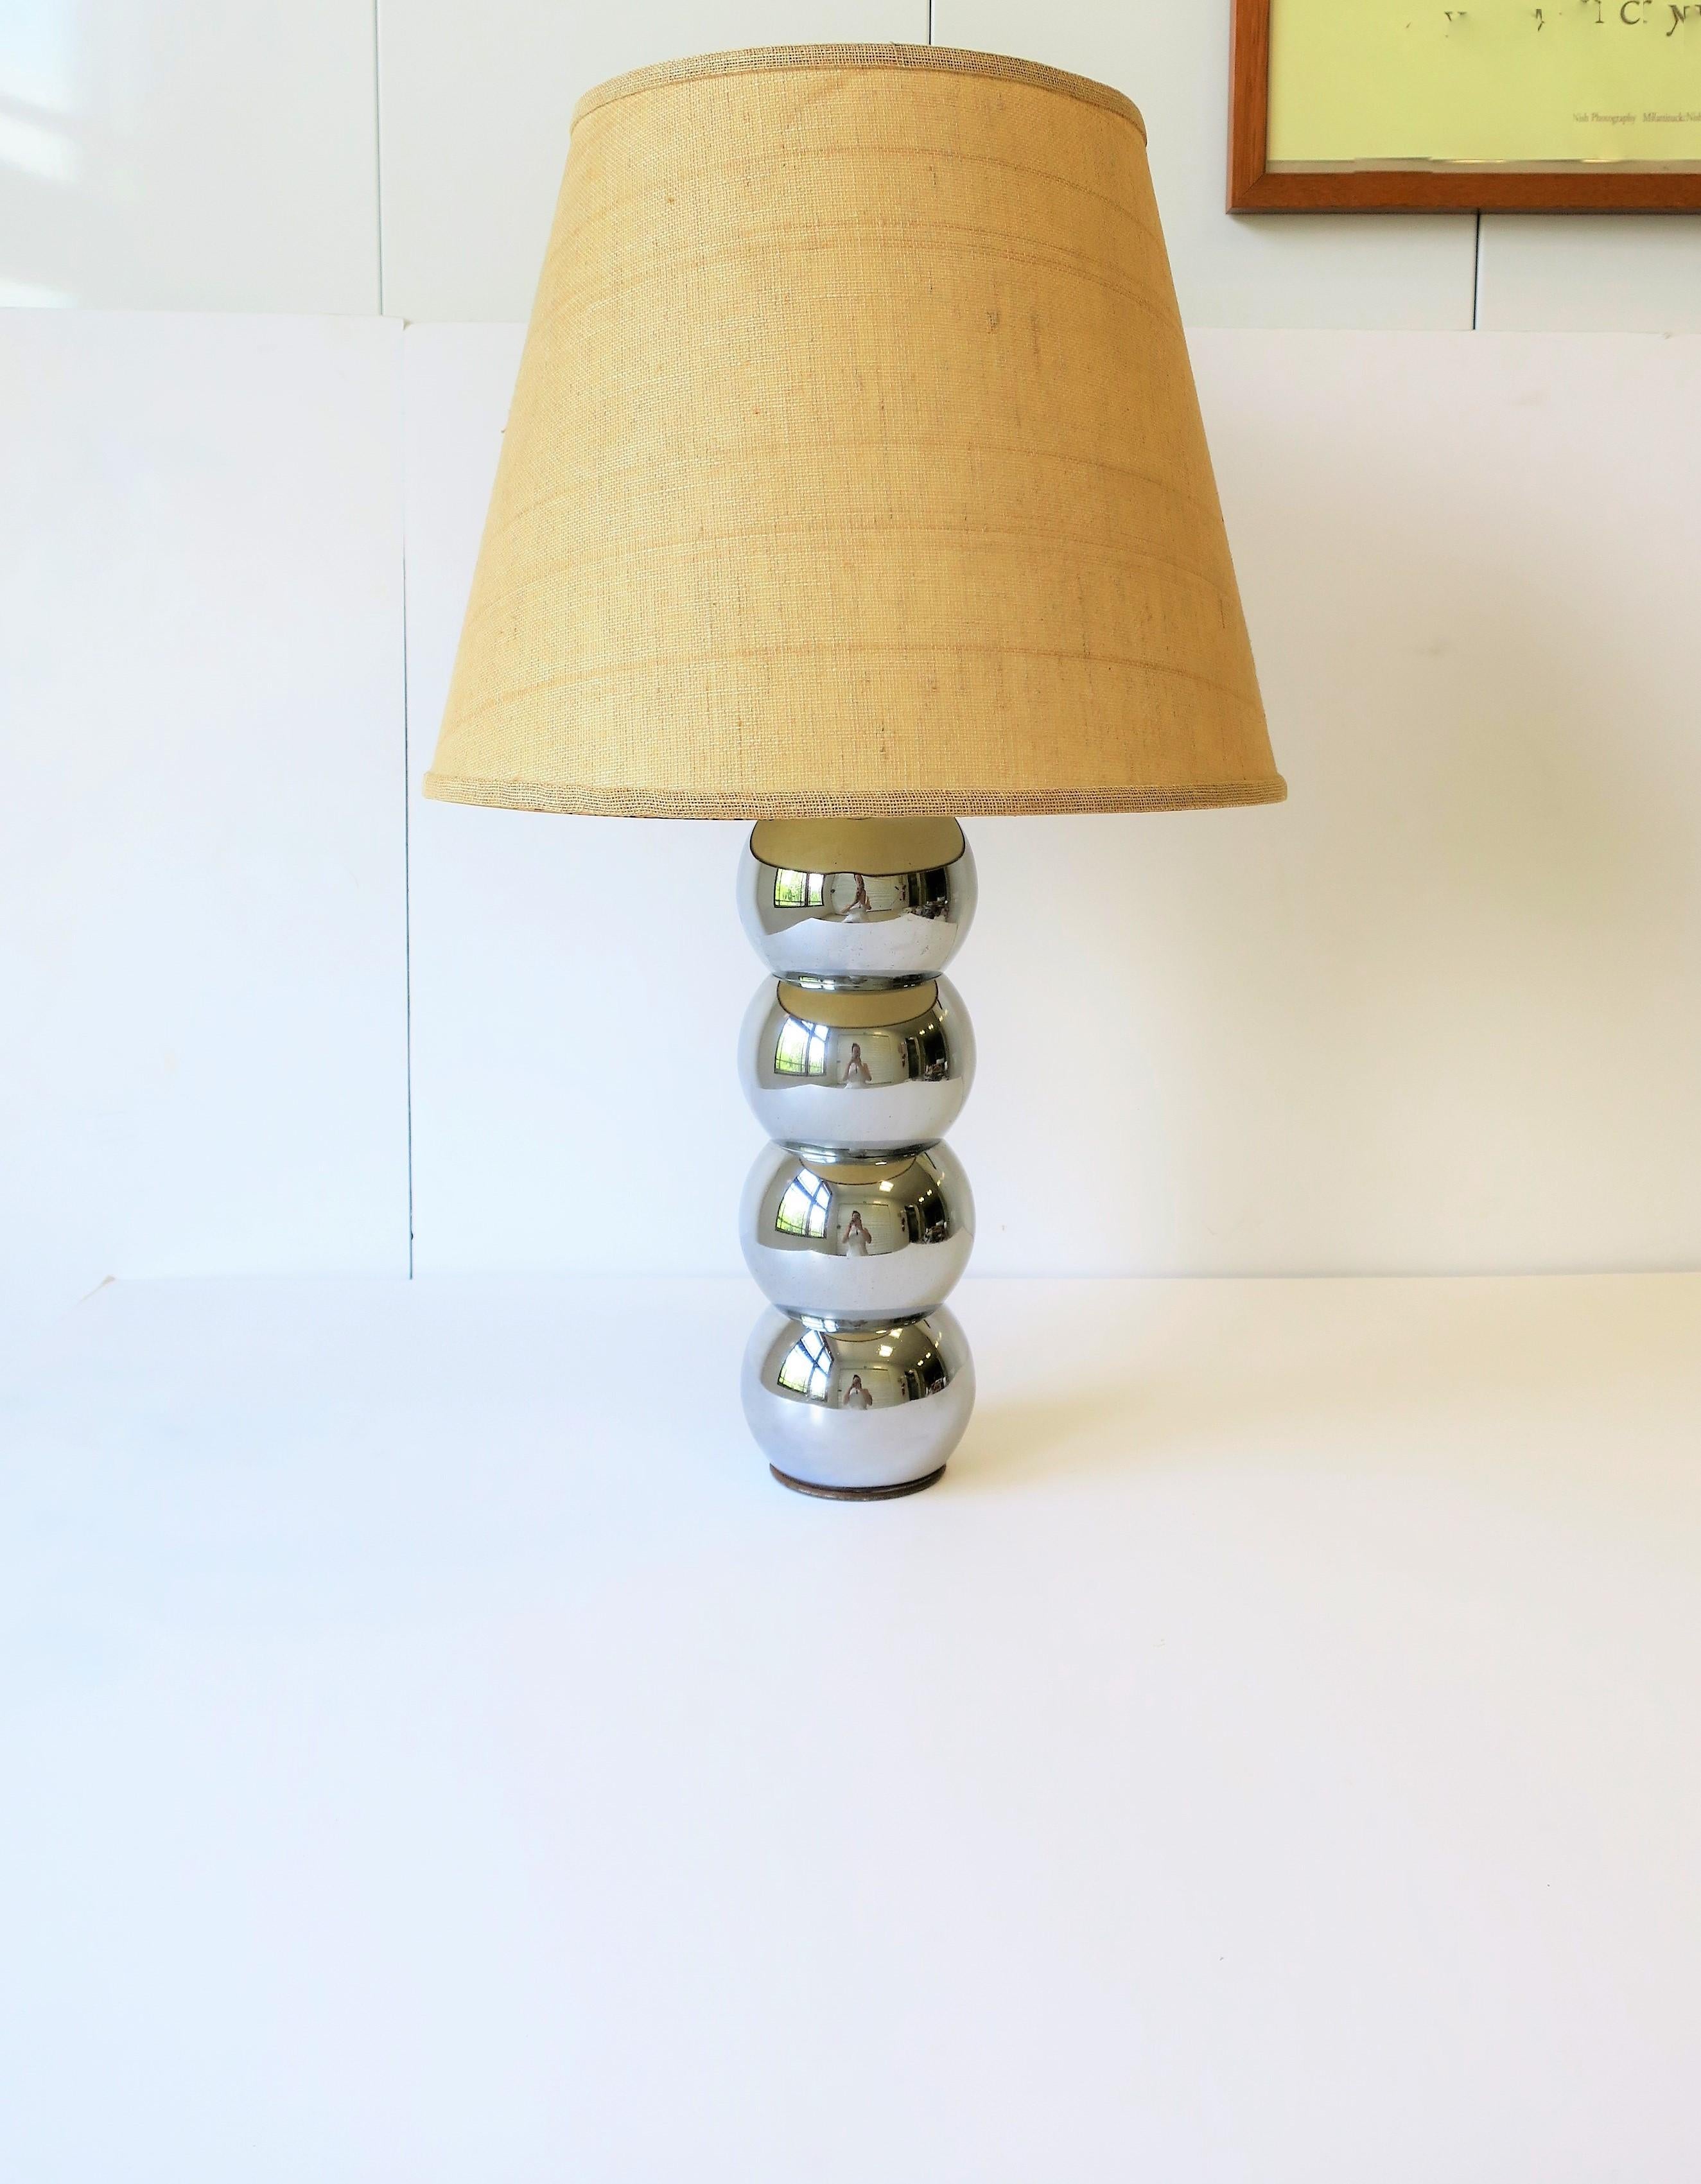 A chic '70s Modern stacked chrome four ball or sphere desk or table lamp attributed to George Kovacs. Lamp is a convenient size too, please note measurements; lamp is smaller in size and great for a small table, nightstand, or desk, as demonstrated